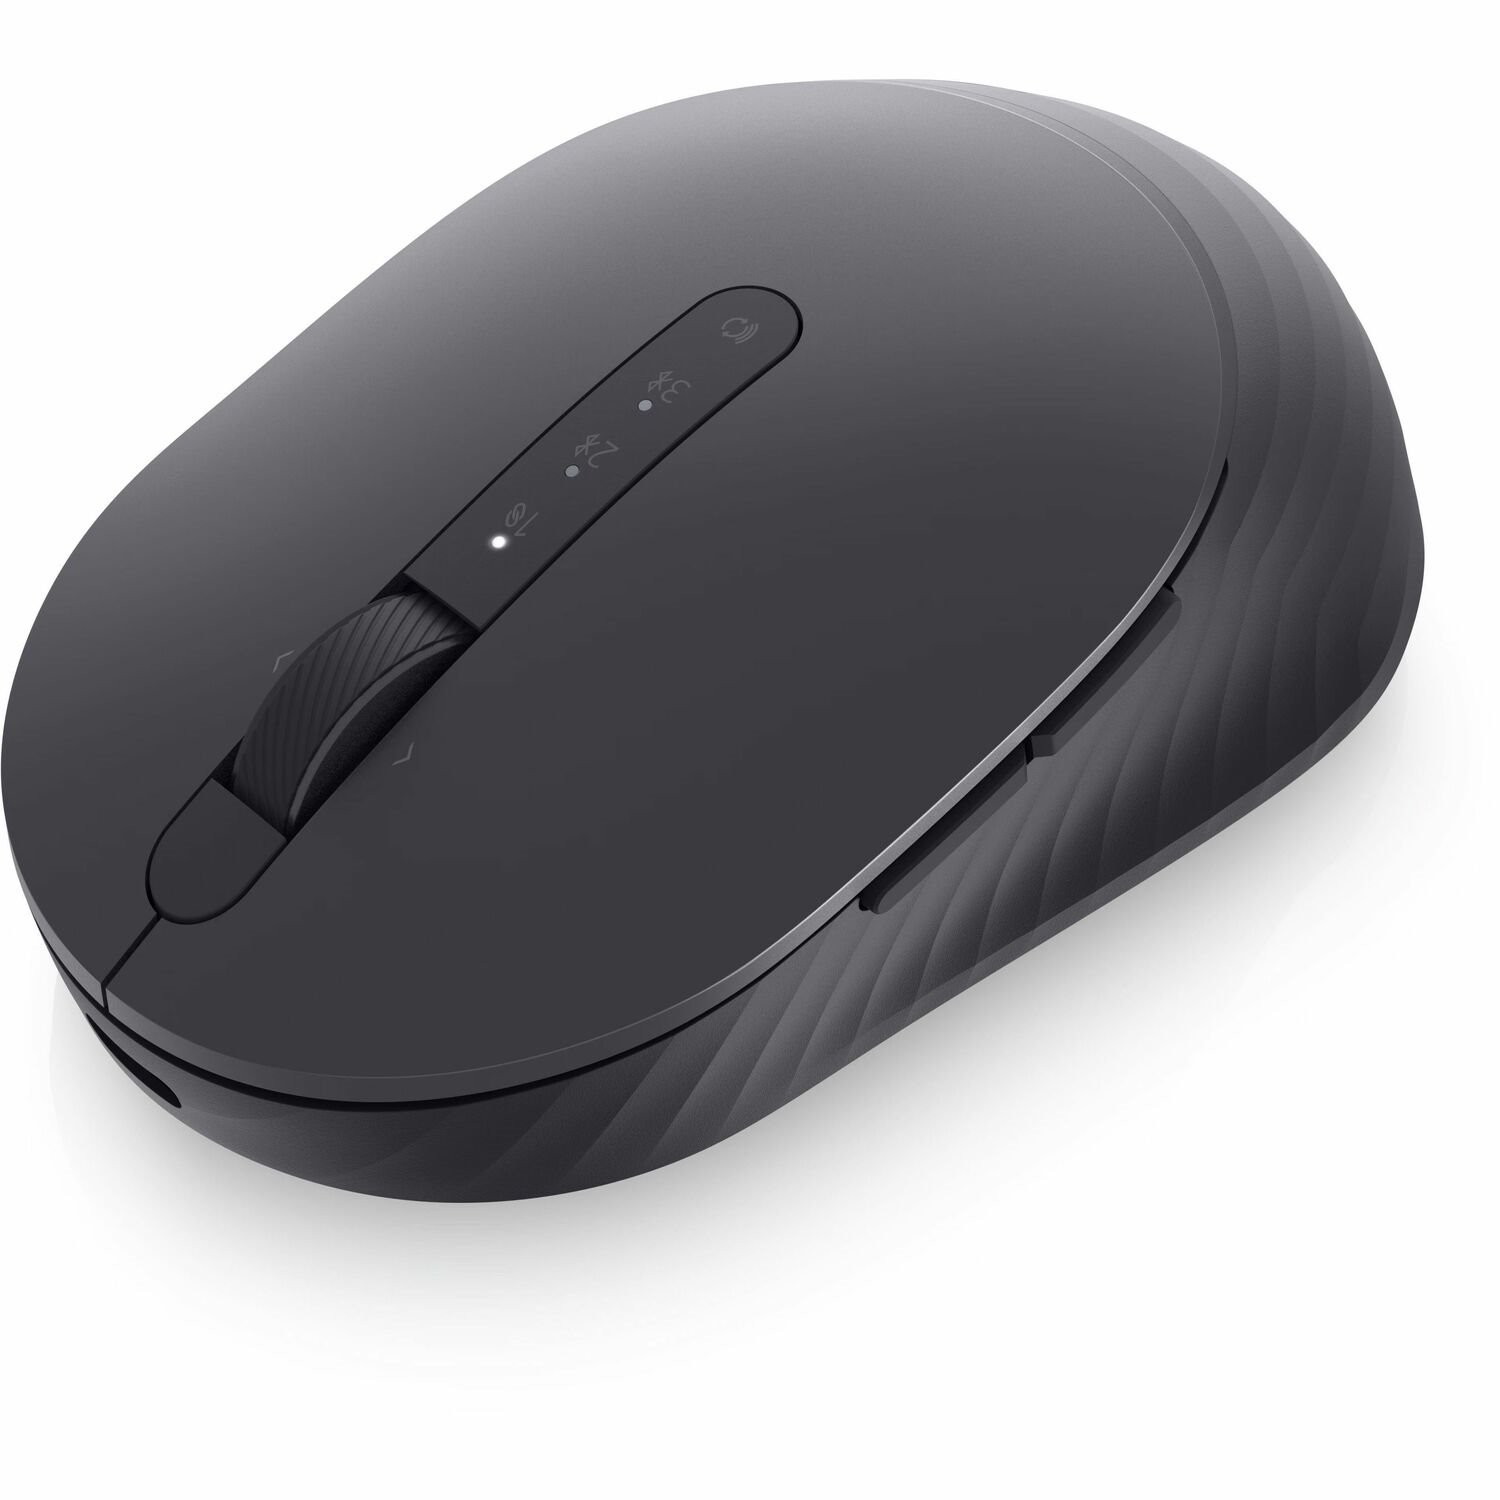 Dell Premier MS7421W Mouse - Bluetooth/Radio Frequency - USB - Optical - 7 Button(s) - Graphite Black